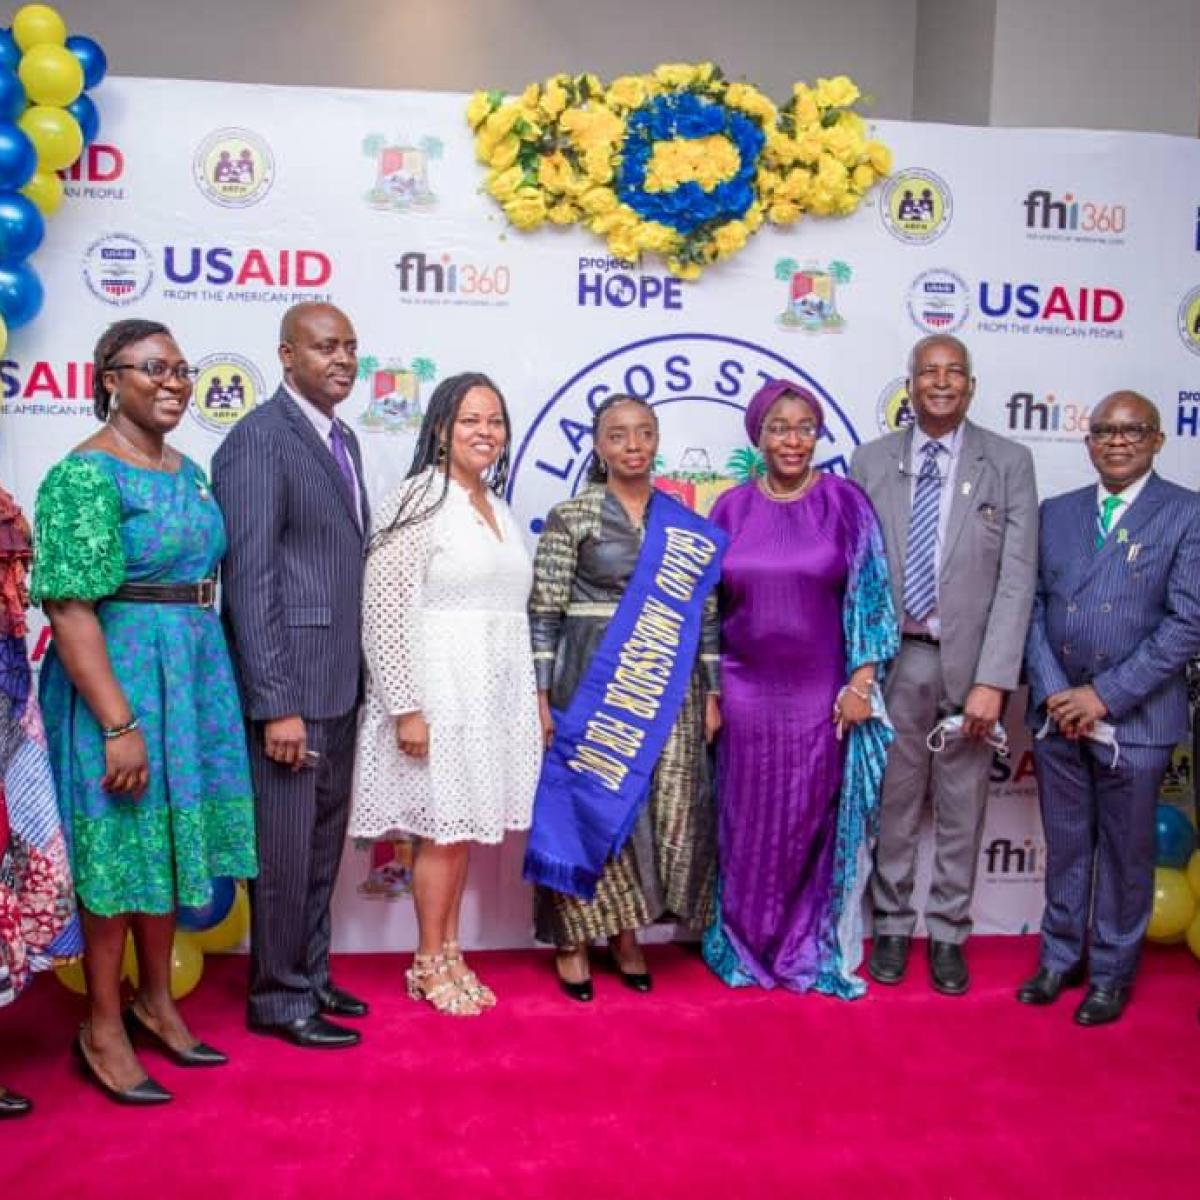 In the middle, the Lagos State First Lady Dr. Ibijoke Sanwo-Olu, to her left is the USAID Nigeria Deputy Office Director for HIV/AIDS and Tuberculosis, Helina Meri and other guests at the launch of the new ICHSSA 2 activity designed to protect children and their households made vulnerable or orphaned by HIV and AIDS in Nigeria